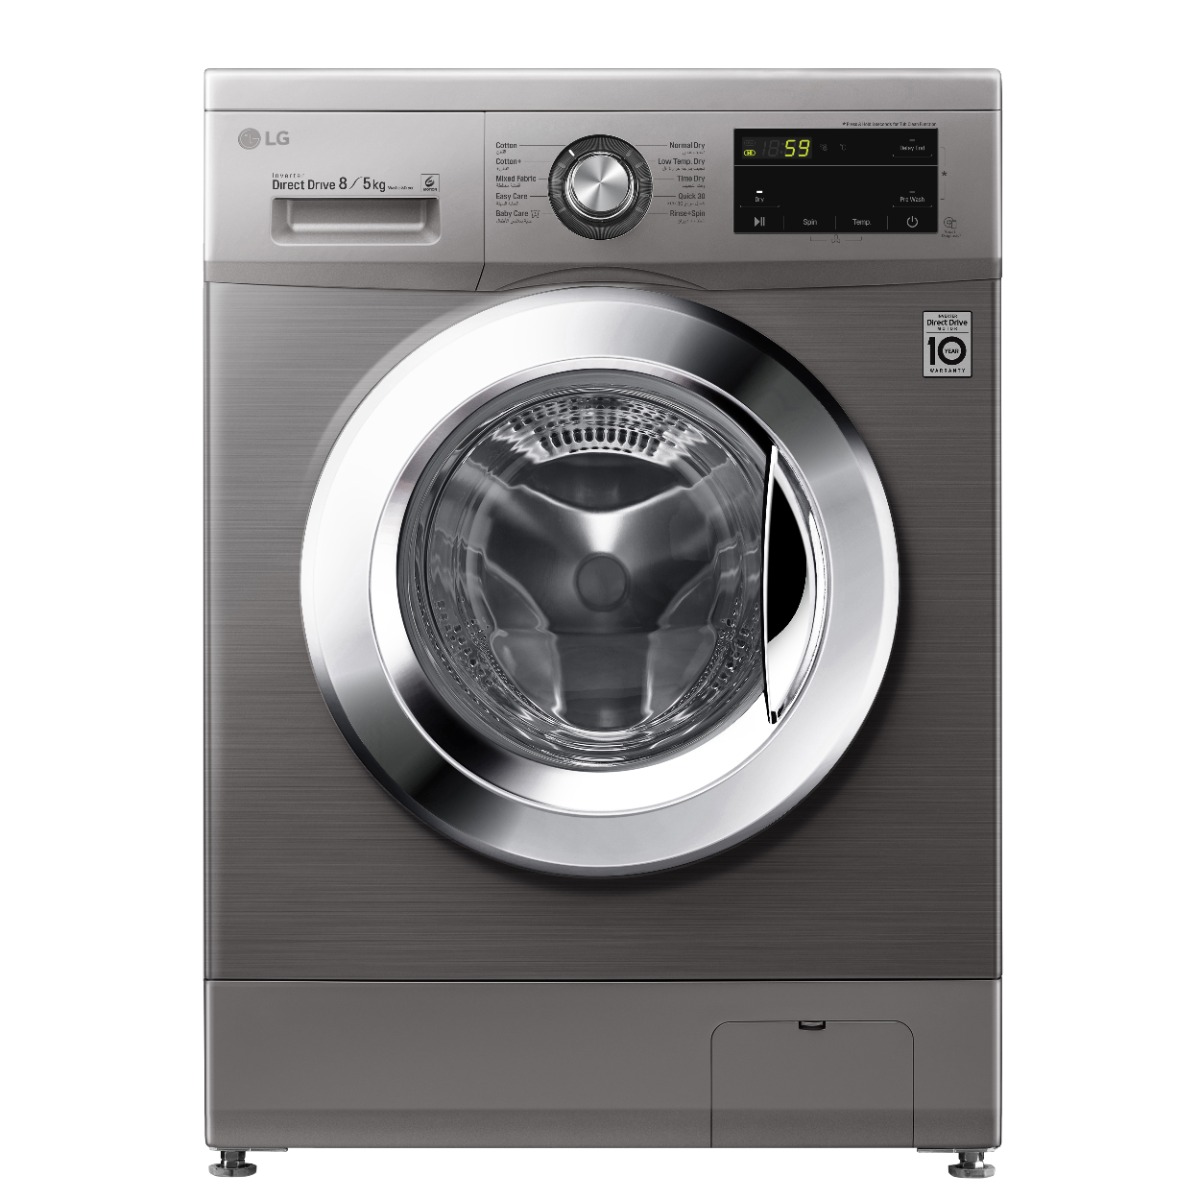 LG 8KG Front Load Inverter Washing Machine with Dryer, Silver - F4J3TMG5P